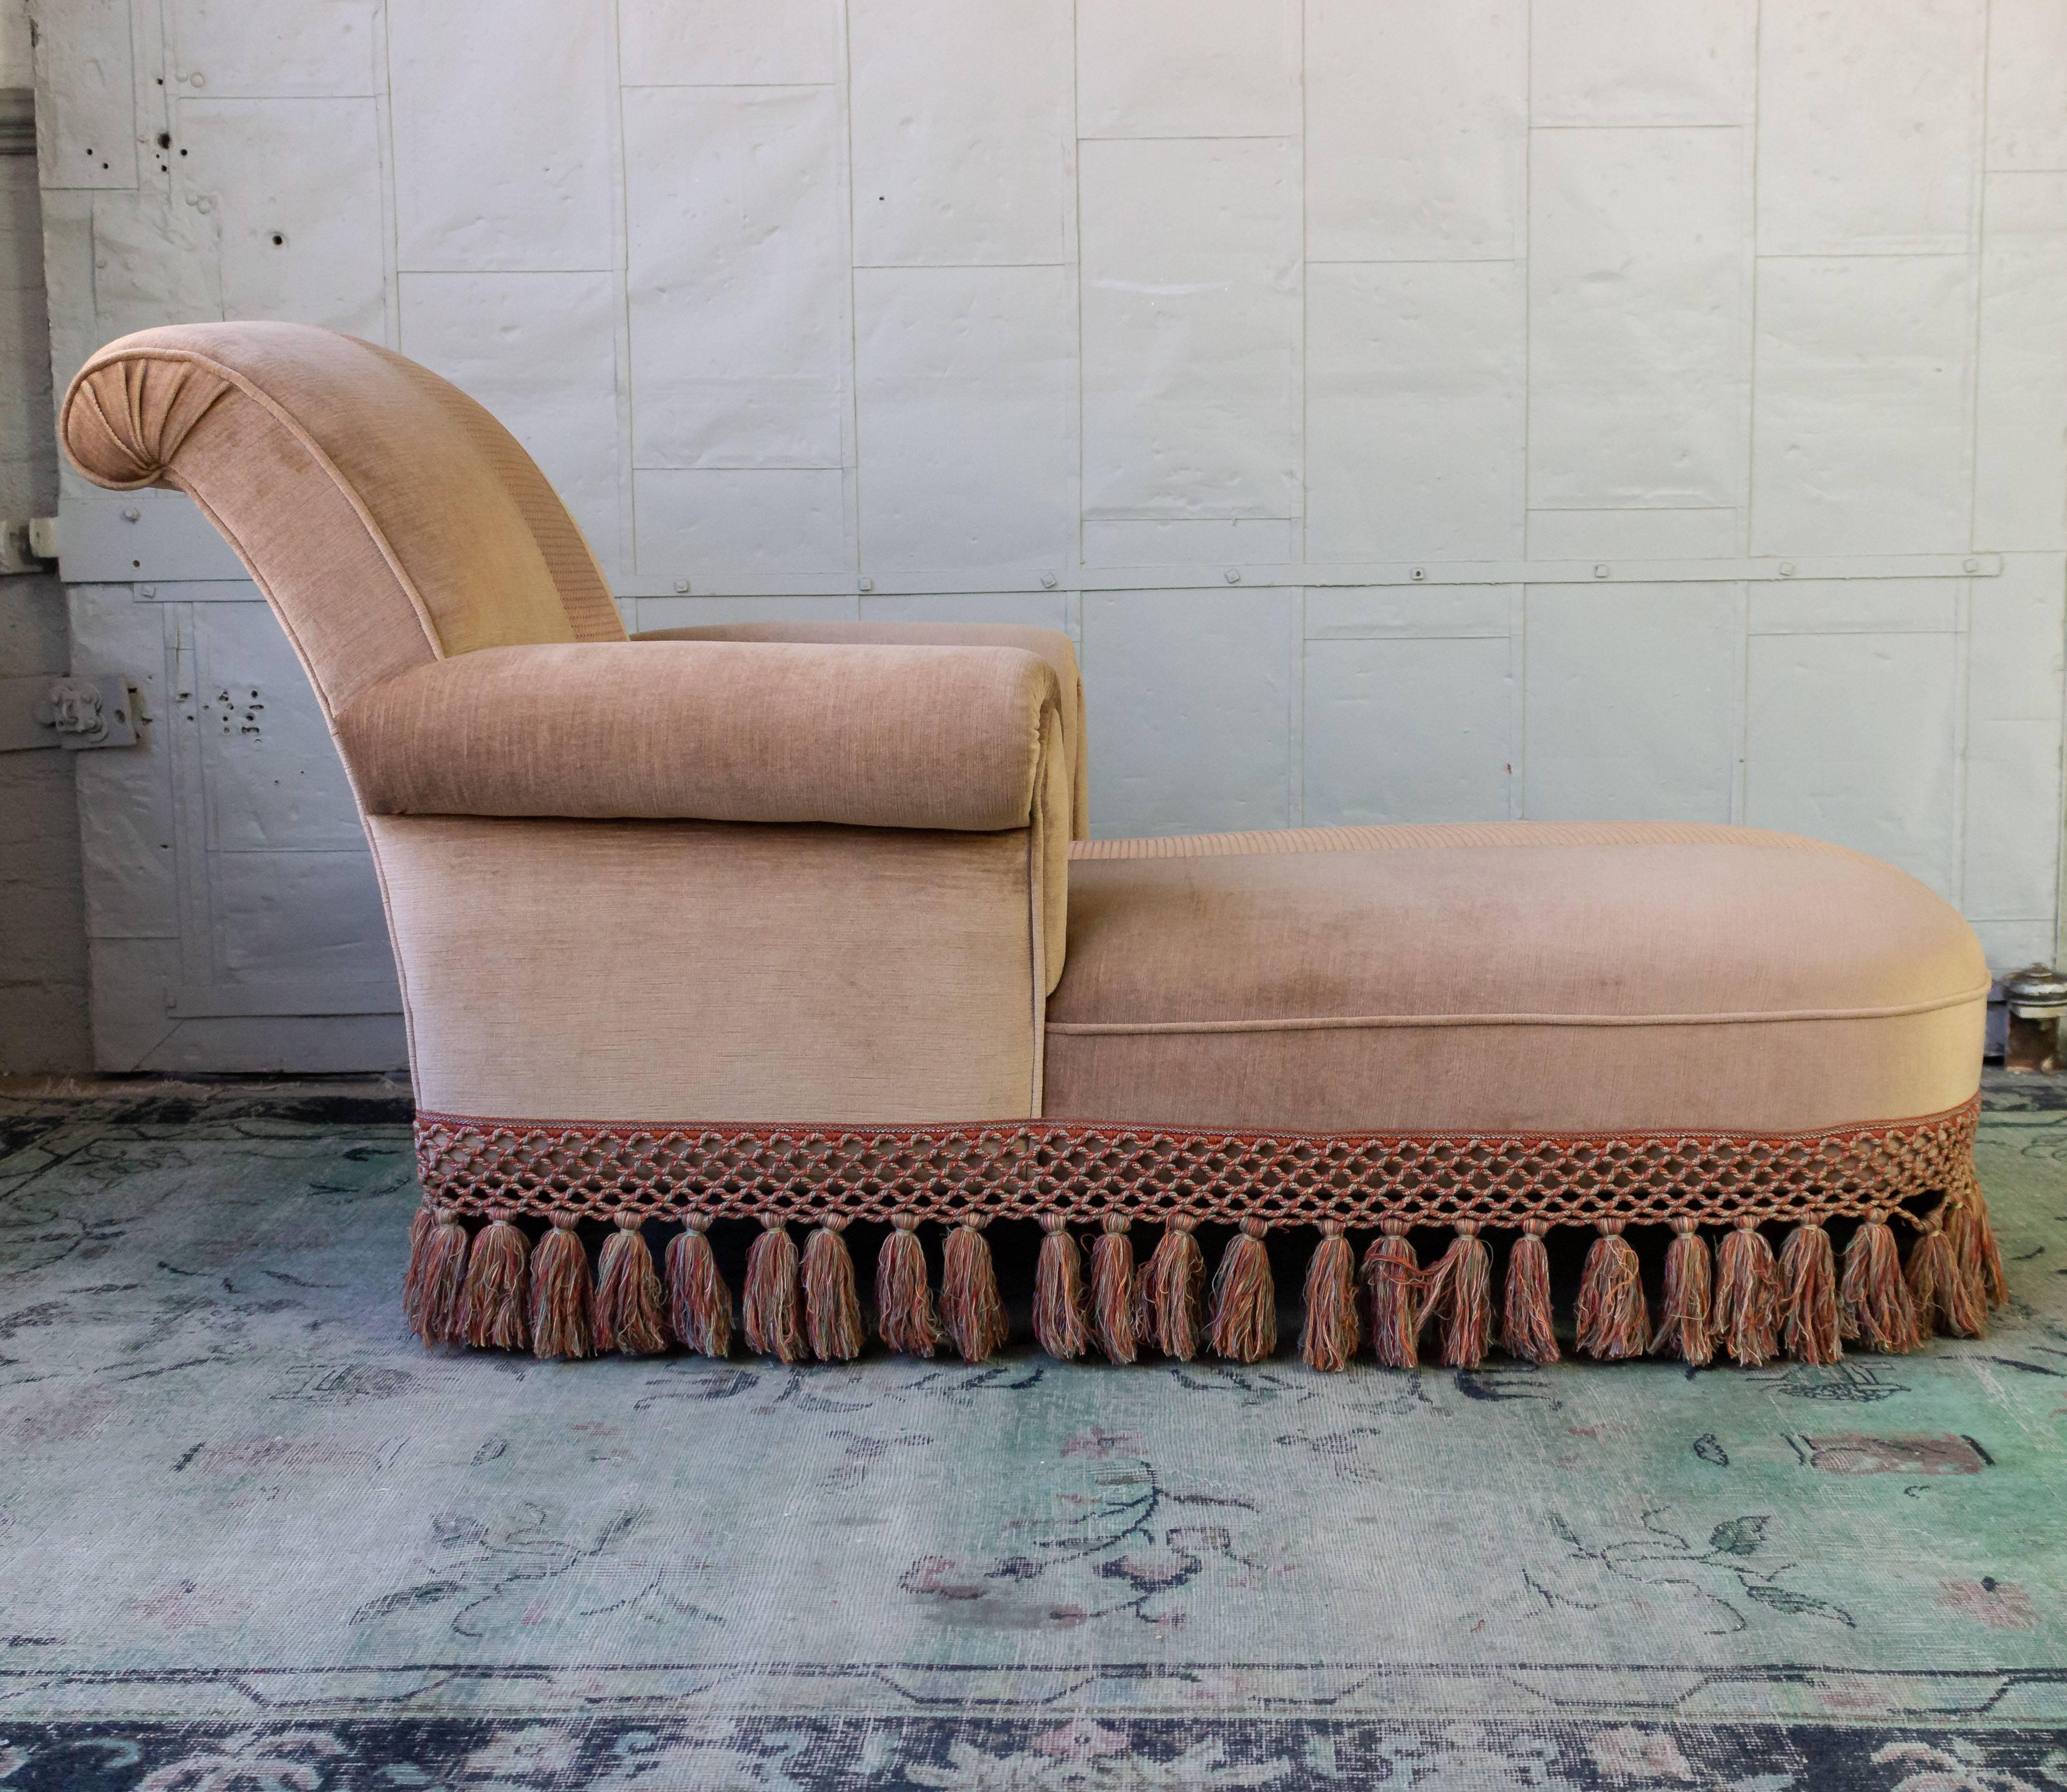 Chaise Longue With Contrasting Fabric and Trim 6